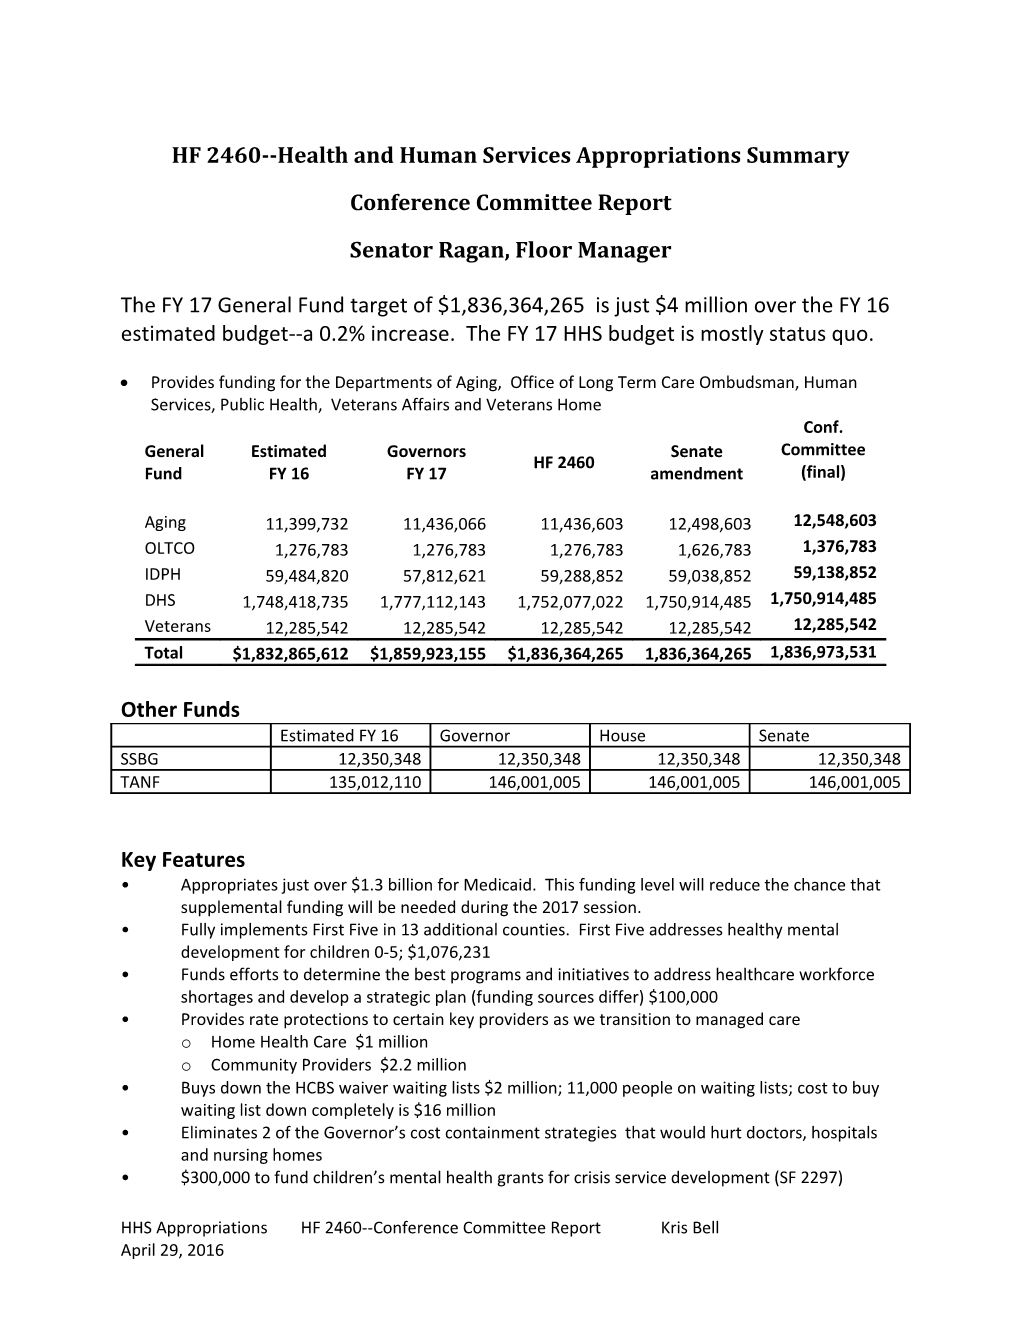 HF 2460 Health and Human Services Appropriations Summary